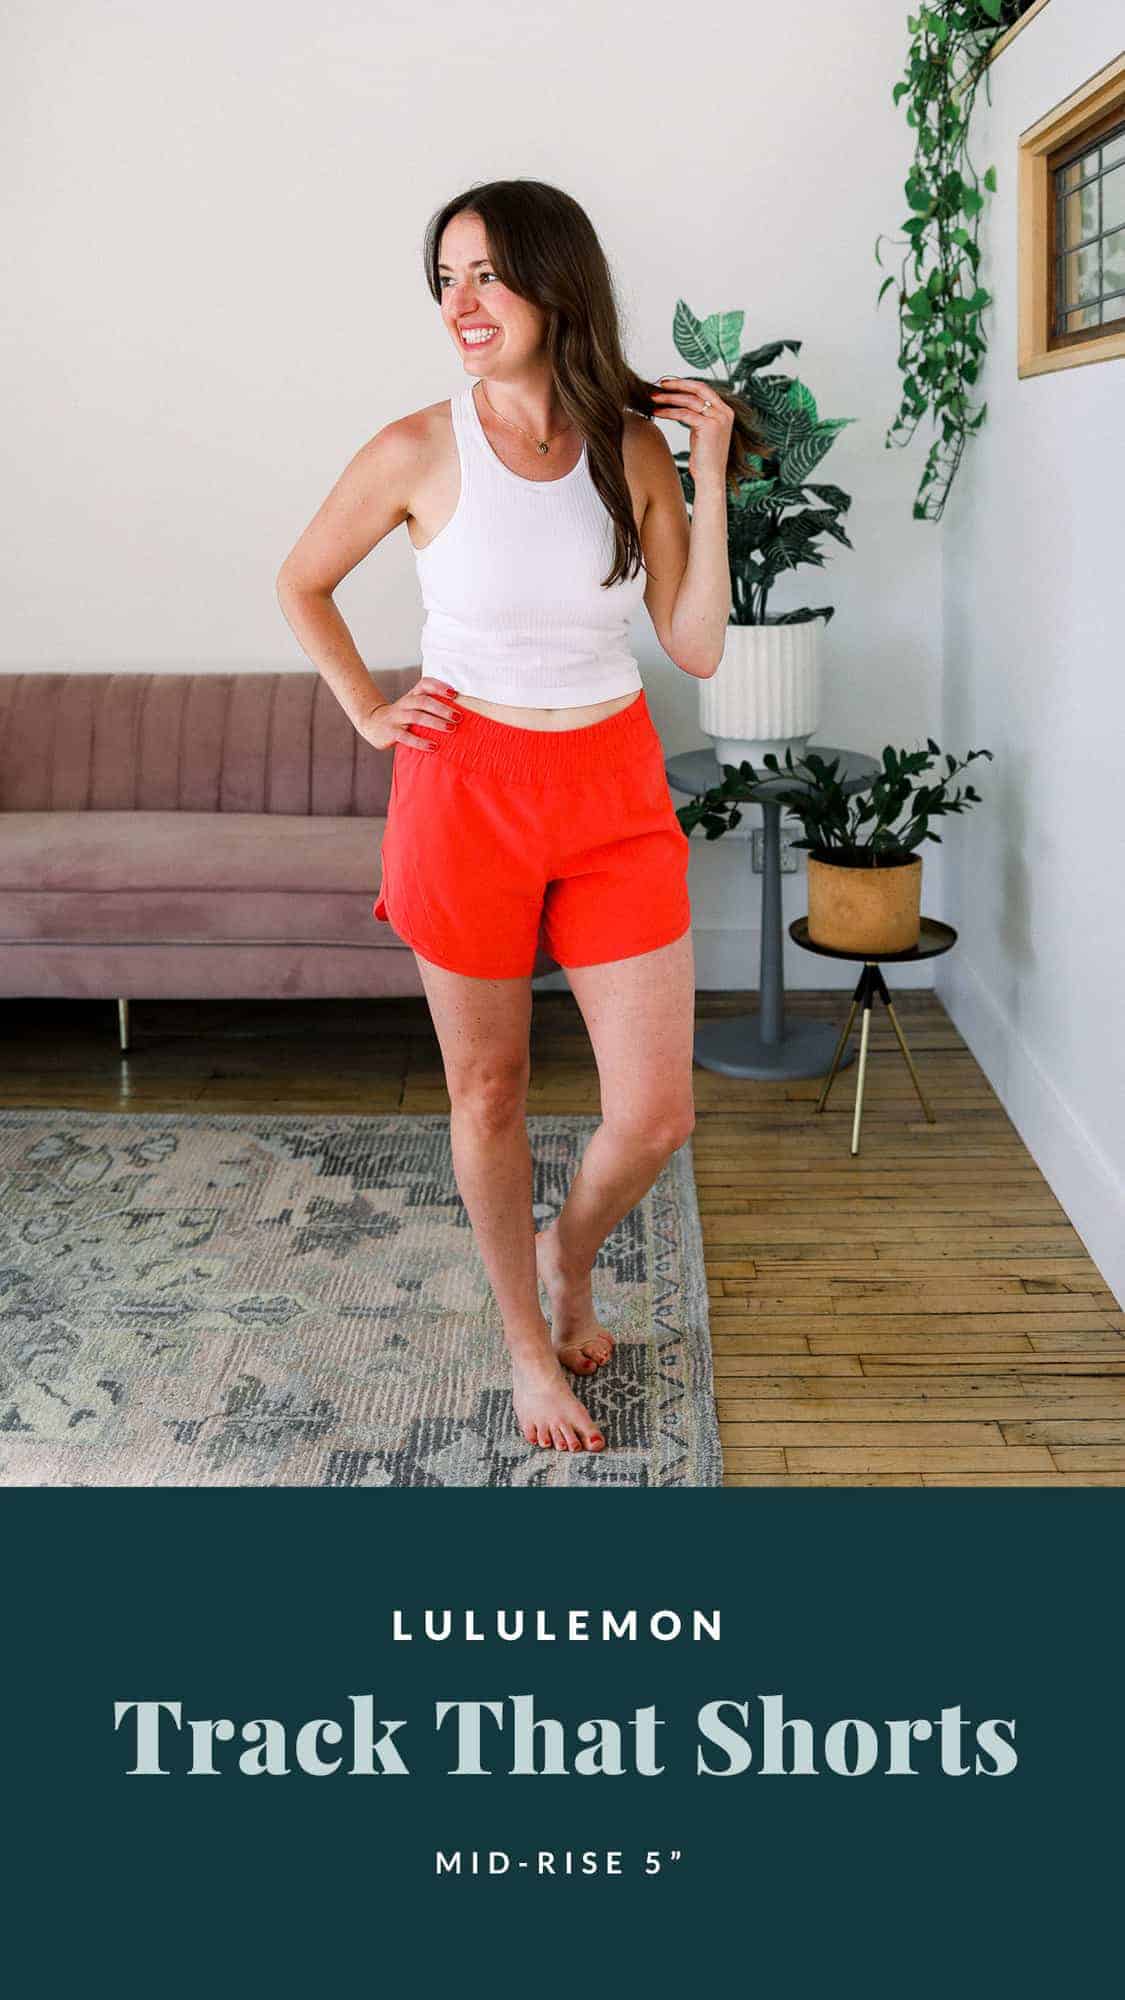 linley wearing lululemon track that shorts in a red color